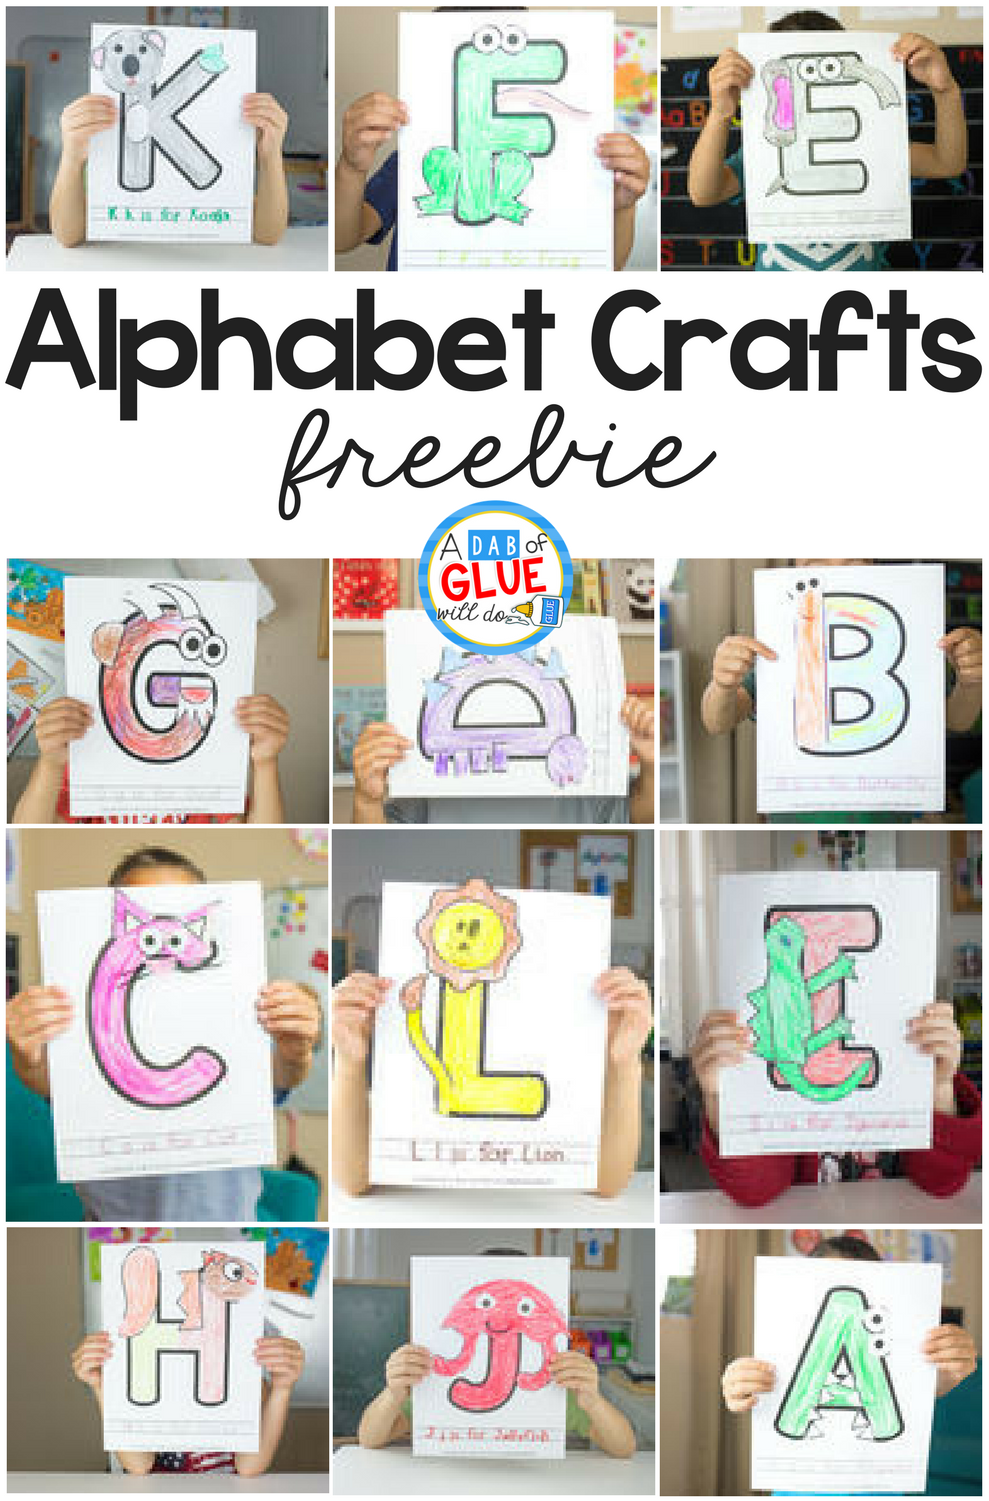 I'm thrilled to bring you our Animal Alphabet Letter Crafts series! This is a great set of letter crafts for your letter of the week or letter recognition activities. 